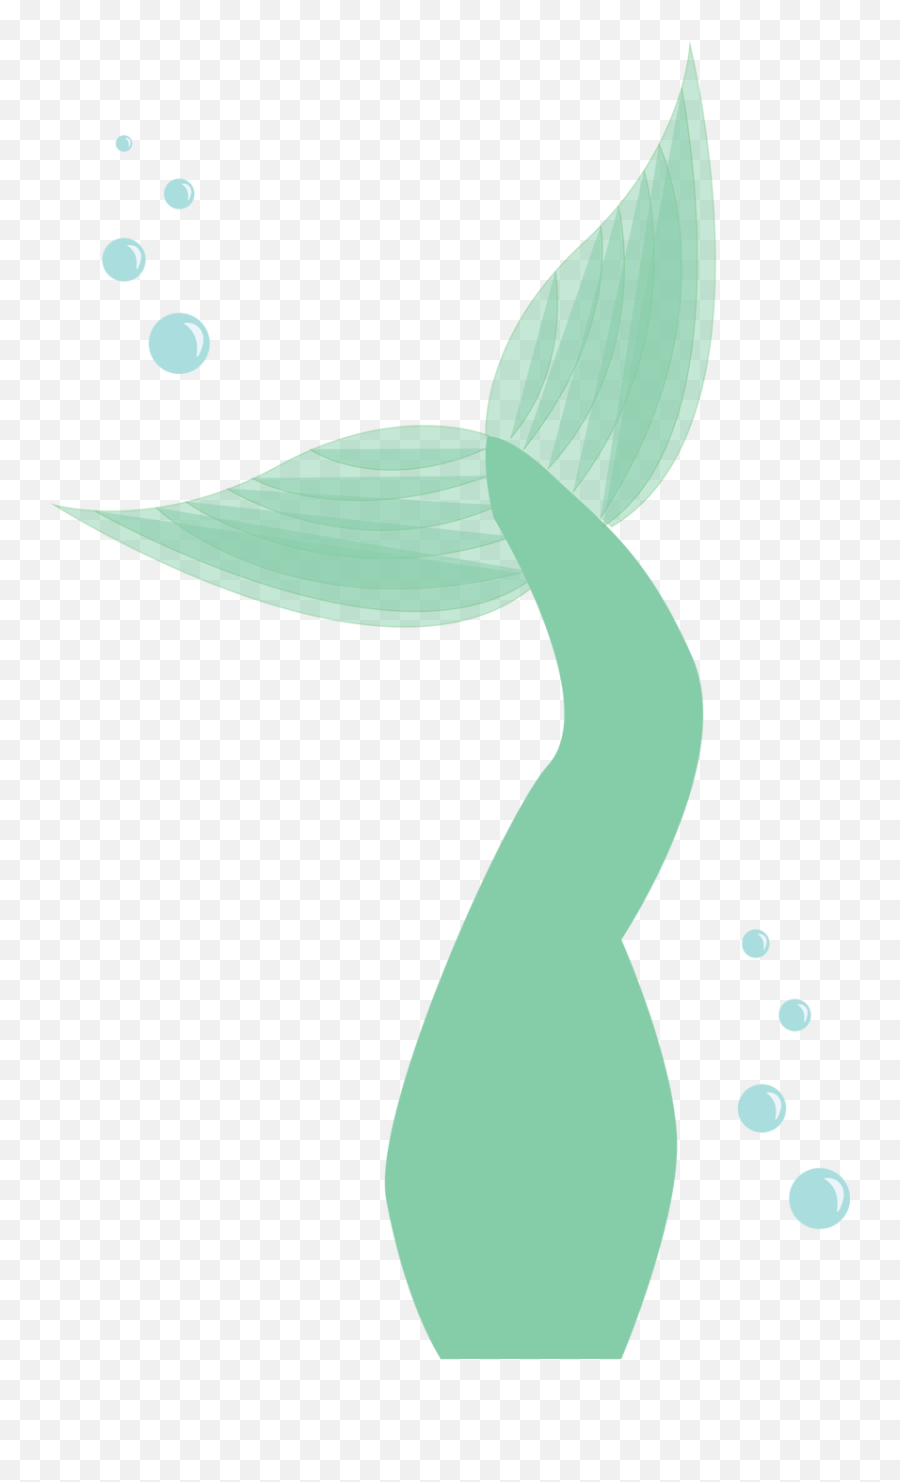 Mermaid Tail Wallpapers - Top Free Mermaid Tail Backgrounds Illustration Png,Mermaid Tail Png